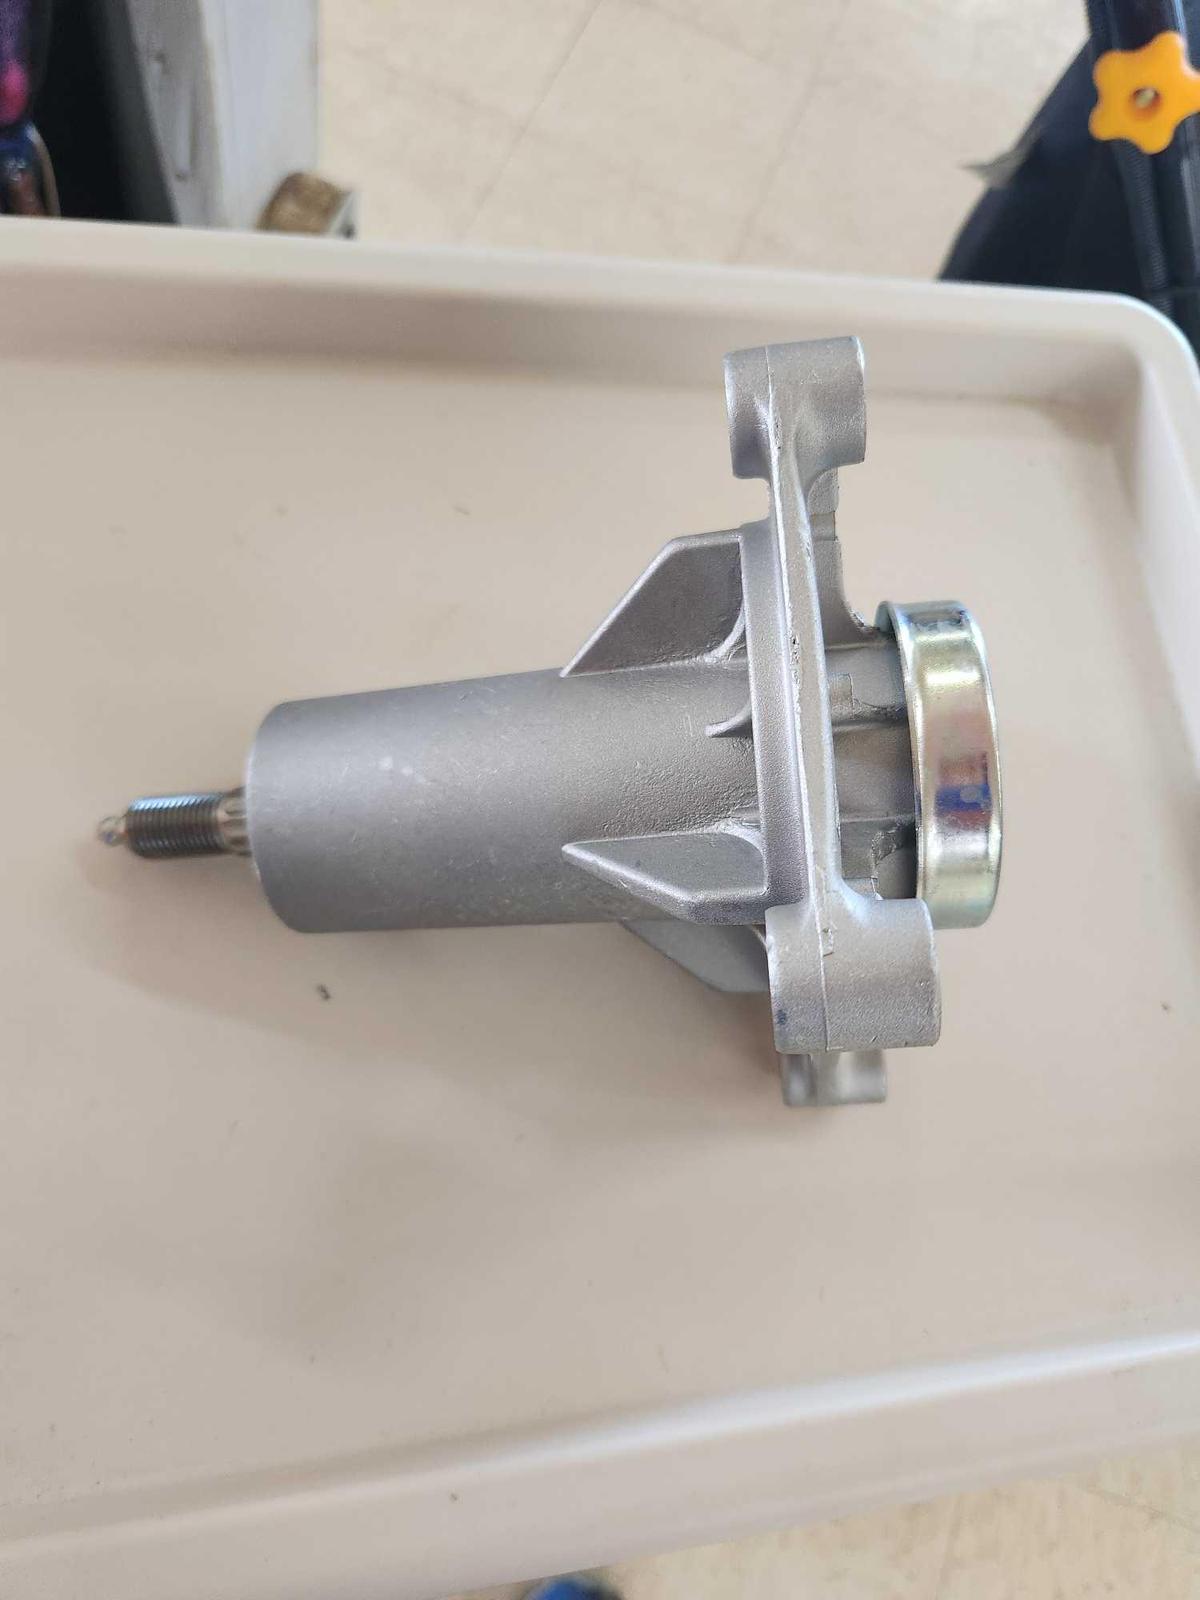 Spindle Assembly, As Pictured